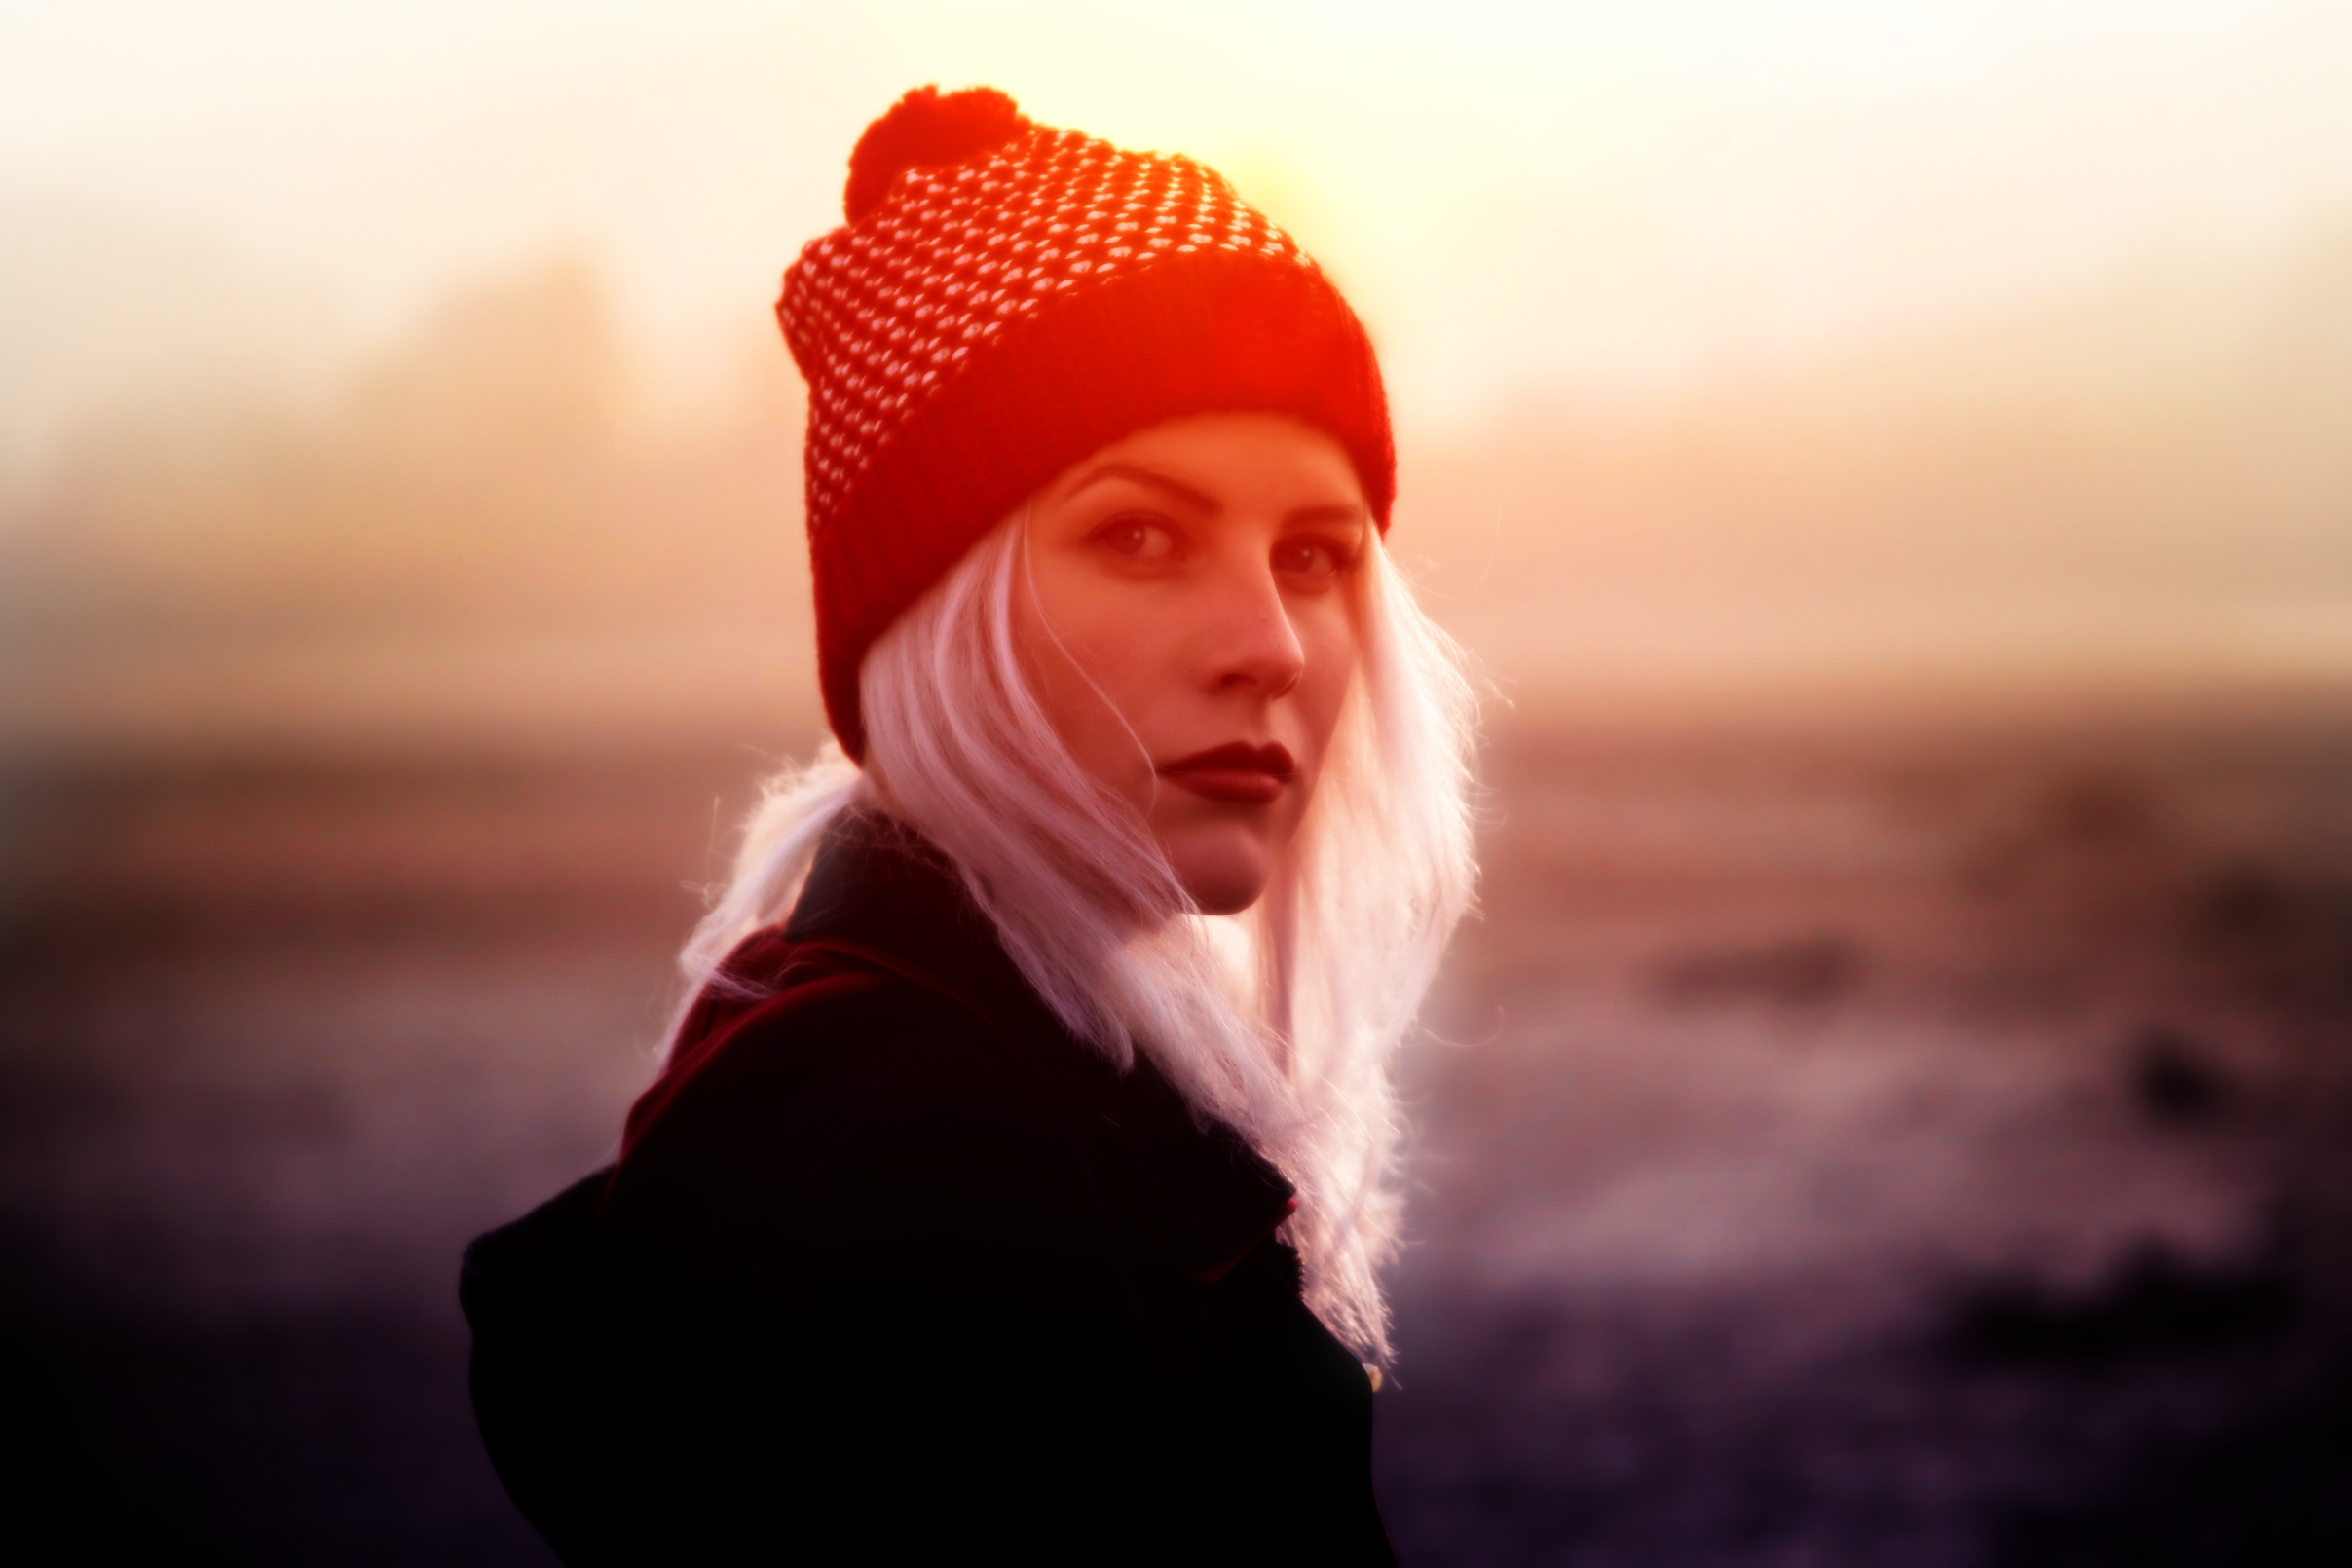 Young Blond Woman with Beanie in Winter, Adult, Photo, Seasonal, Season, HQ Photo